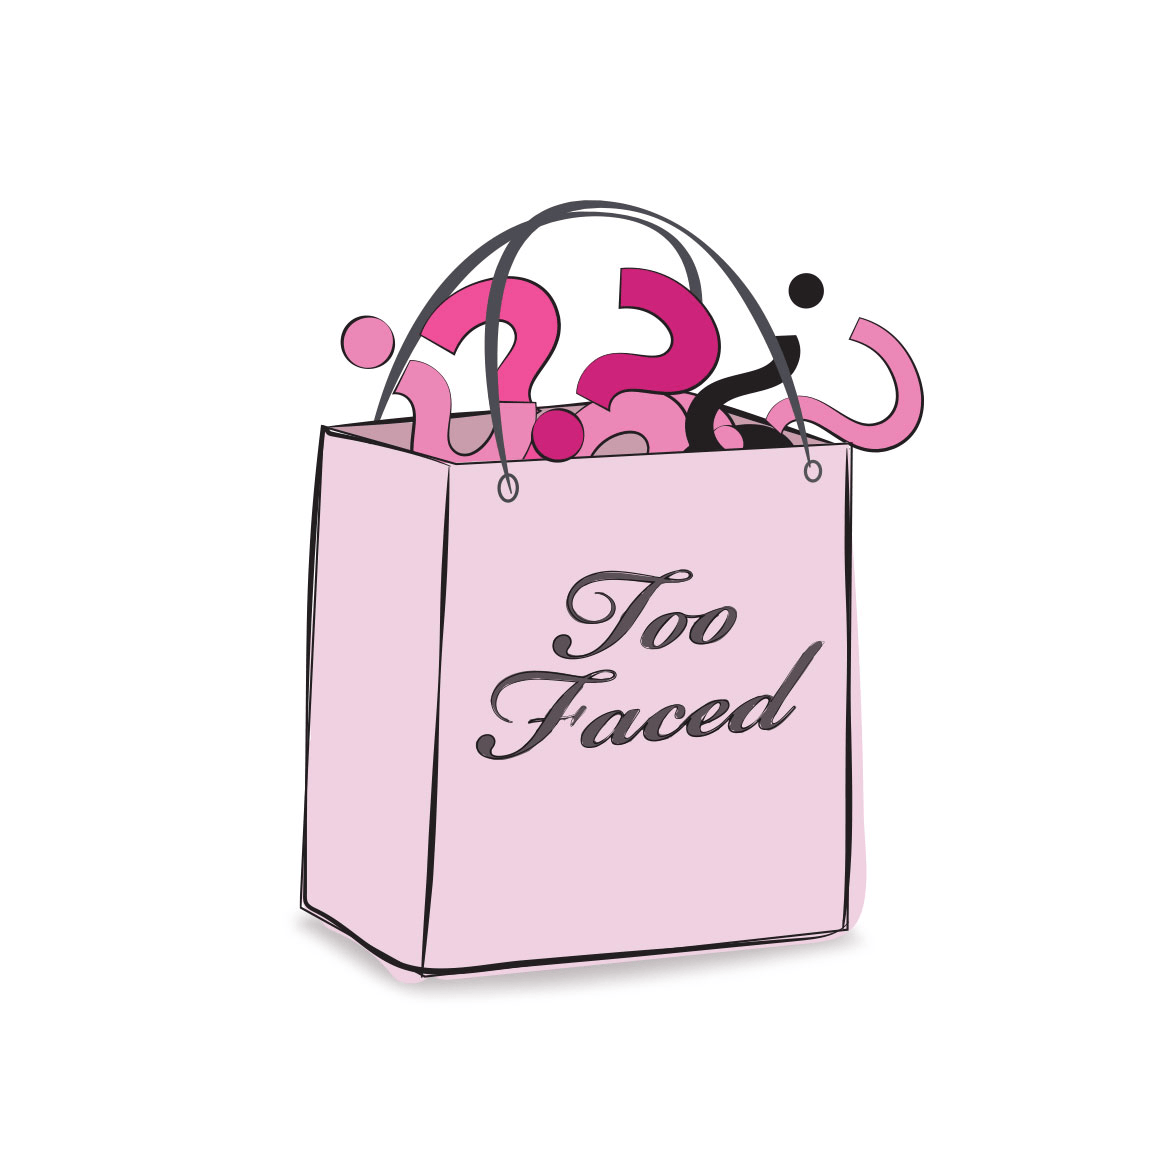 Too Faced Logo - Too Faced Cyber Monday 2016 Mystery Bag Full Spoilers!